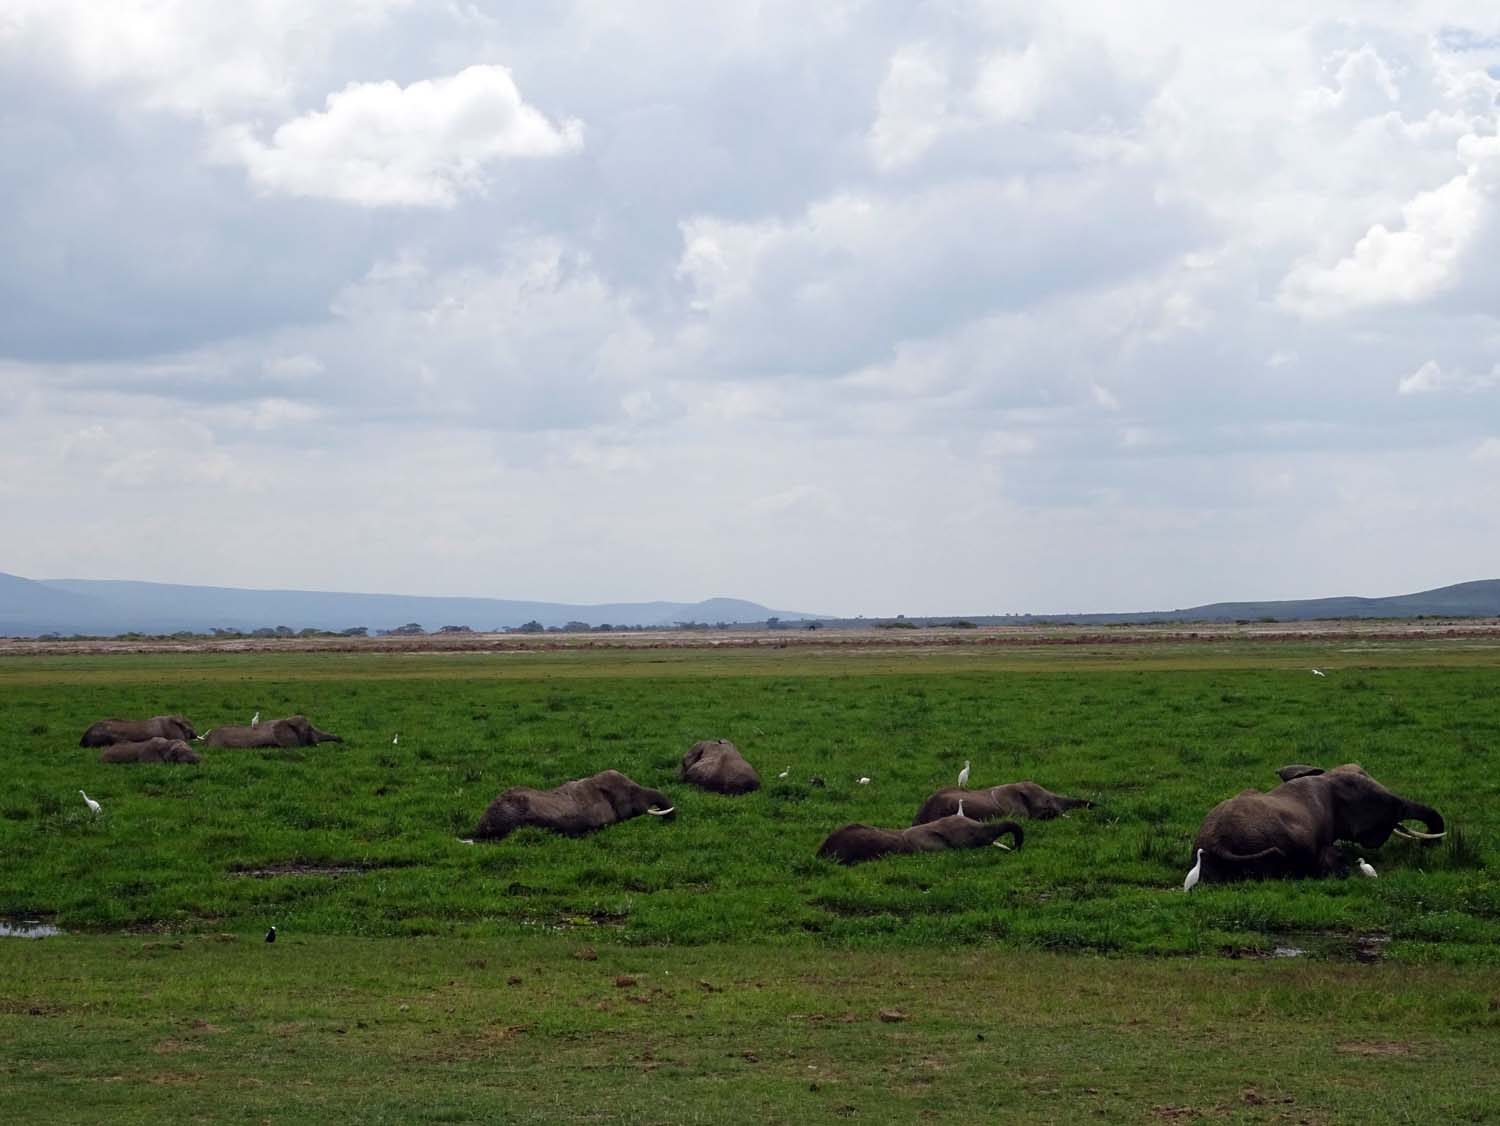 only the backs of these gentle giants visible in the swamp (Amboseli)